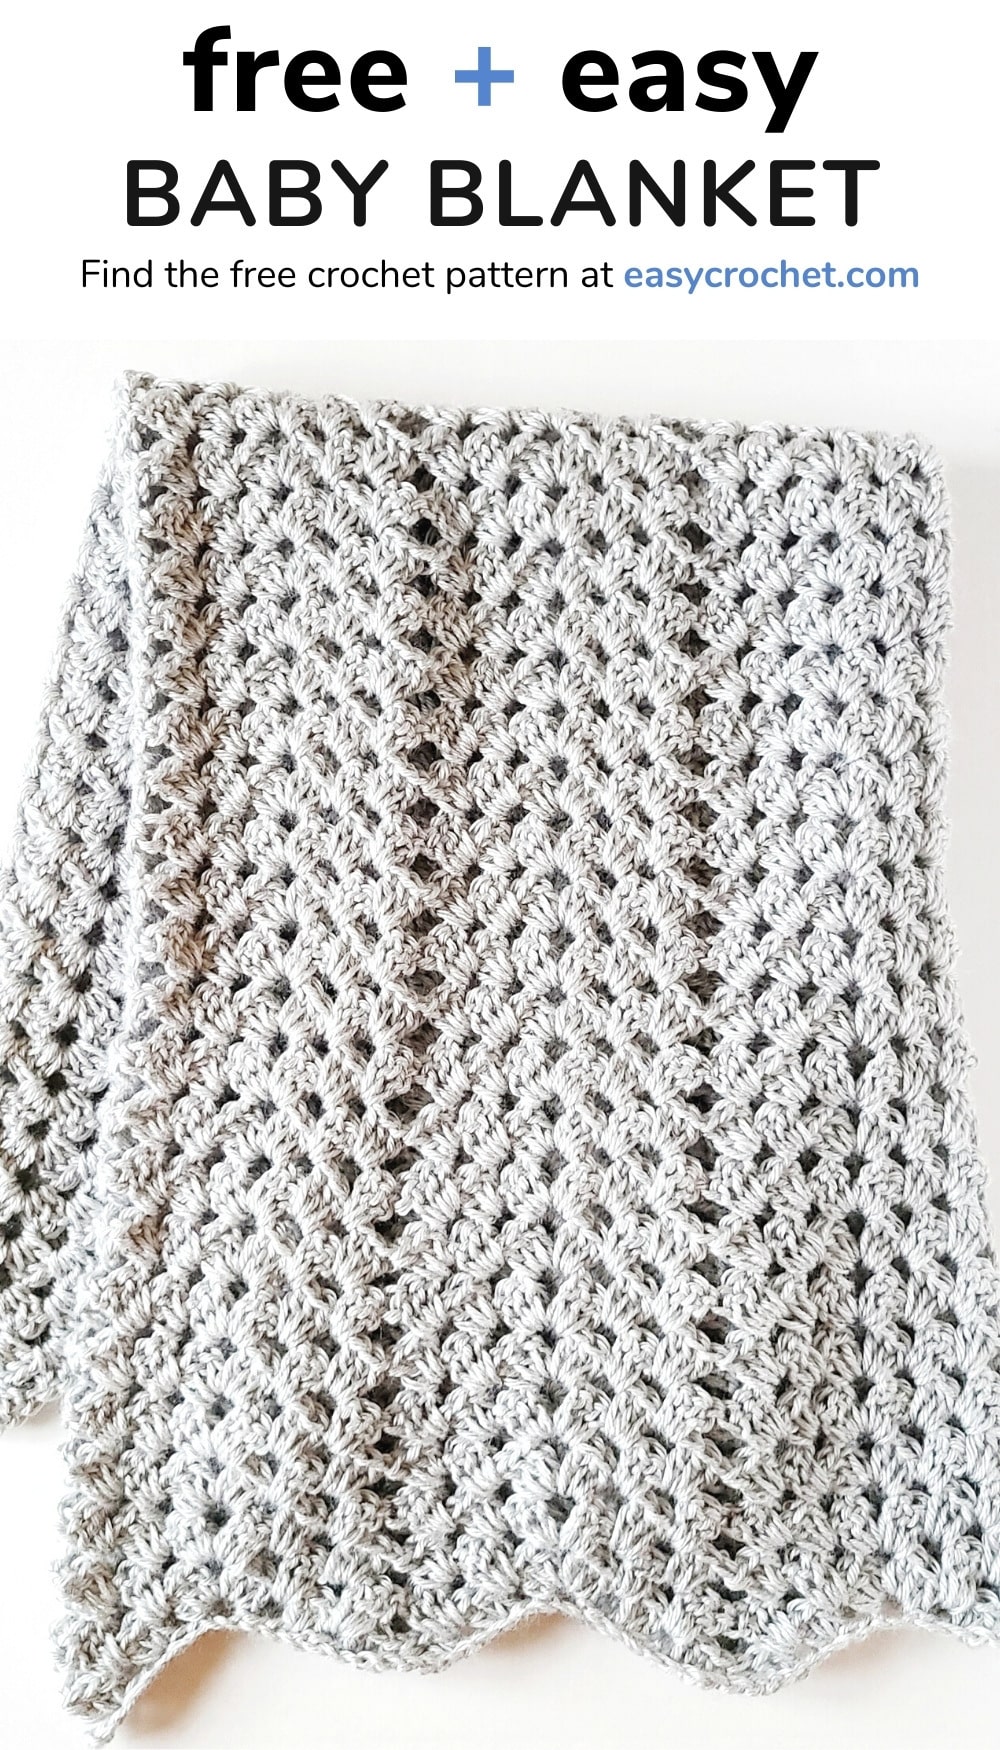 free and easy baby blanket granny stitch 